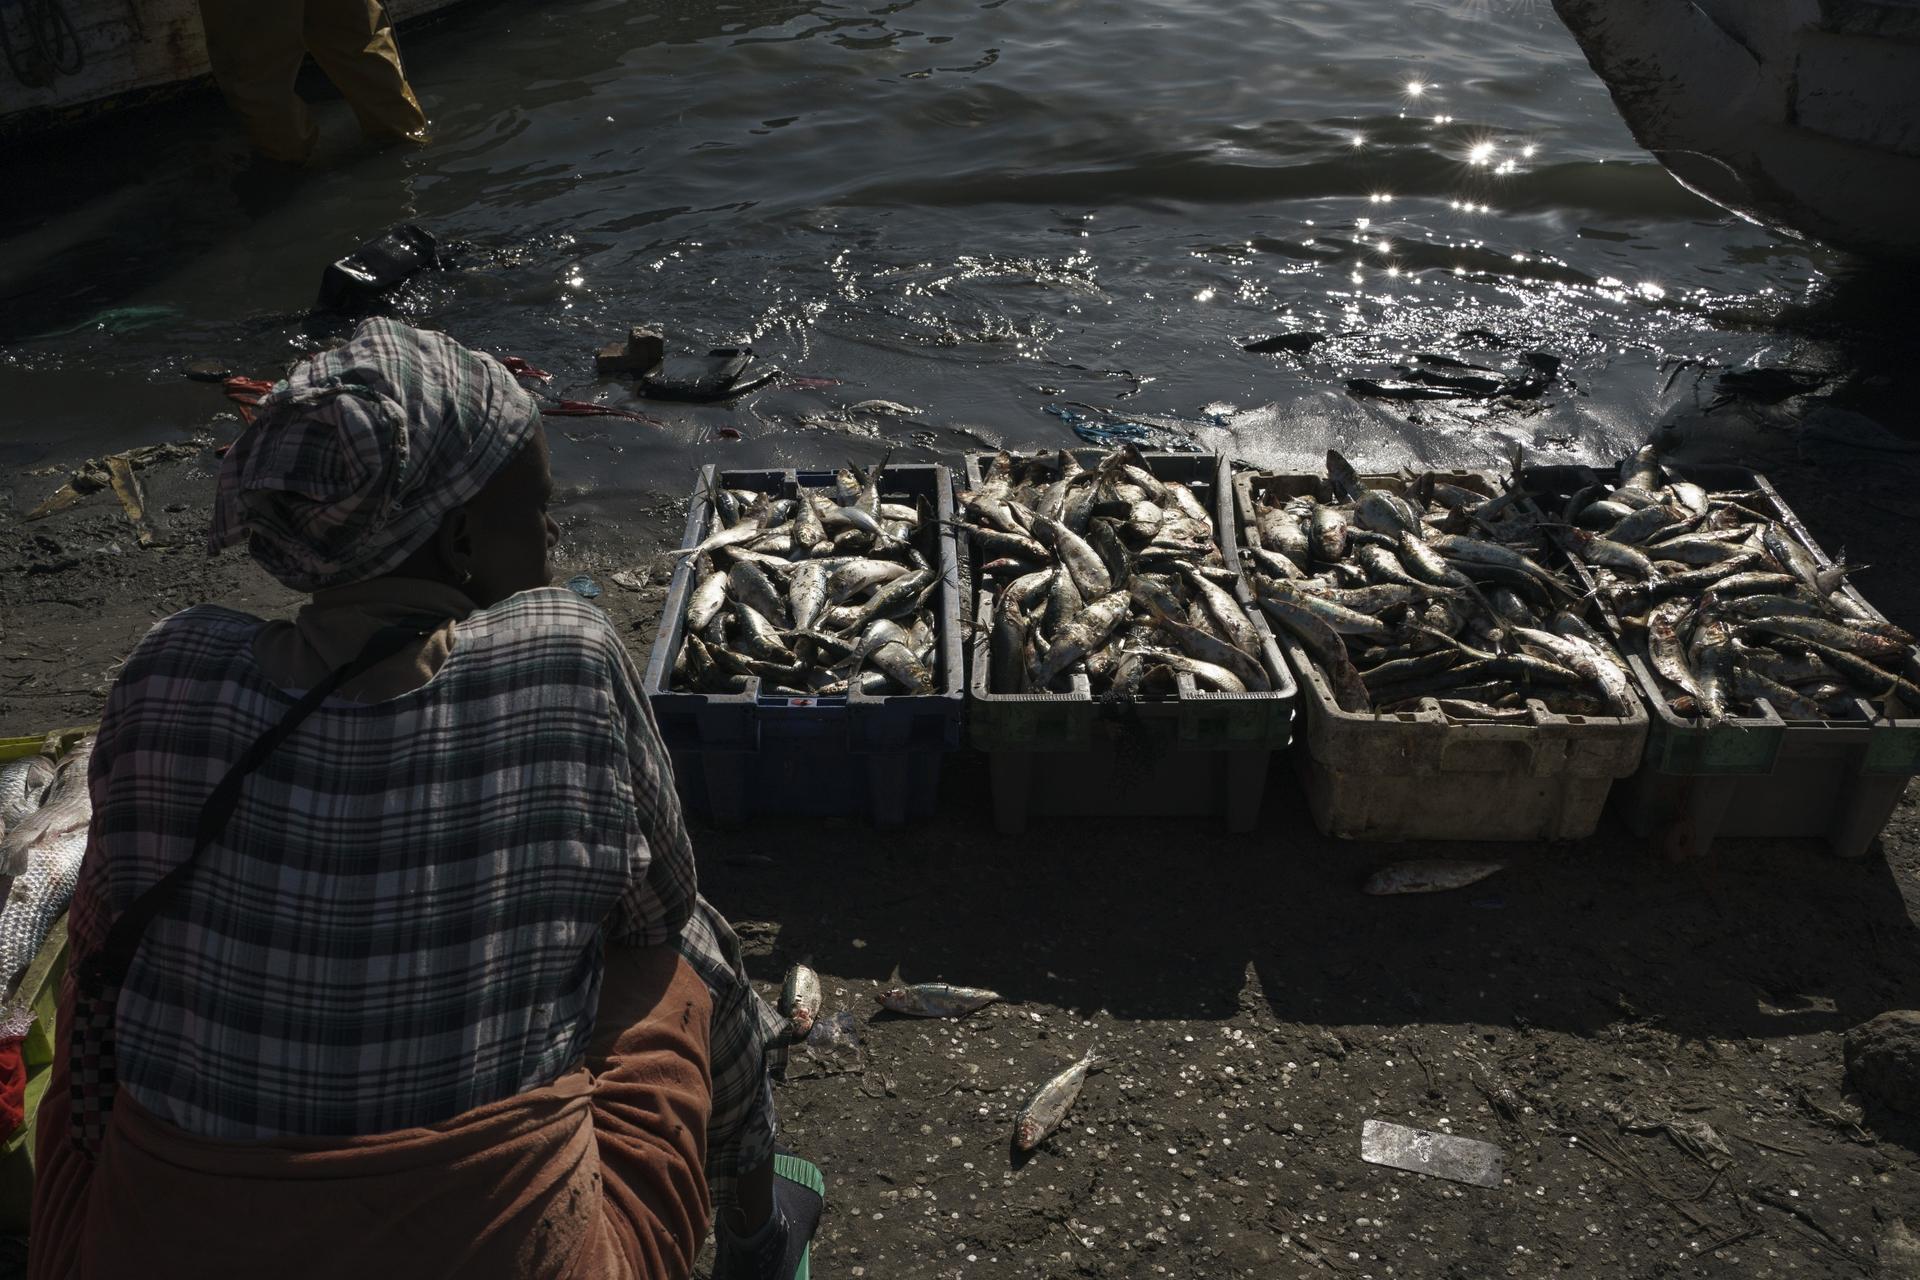 A woman sits next to crates filled with fish as she works at the shore of the Senegal River in Saint-Louis, Senegal, Jan. 20, 2023.